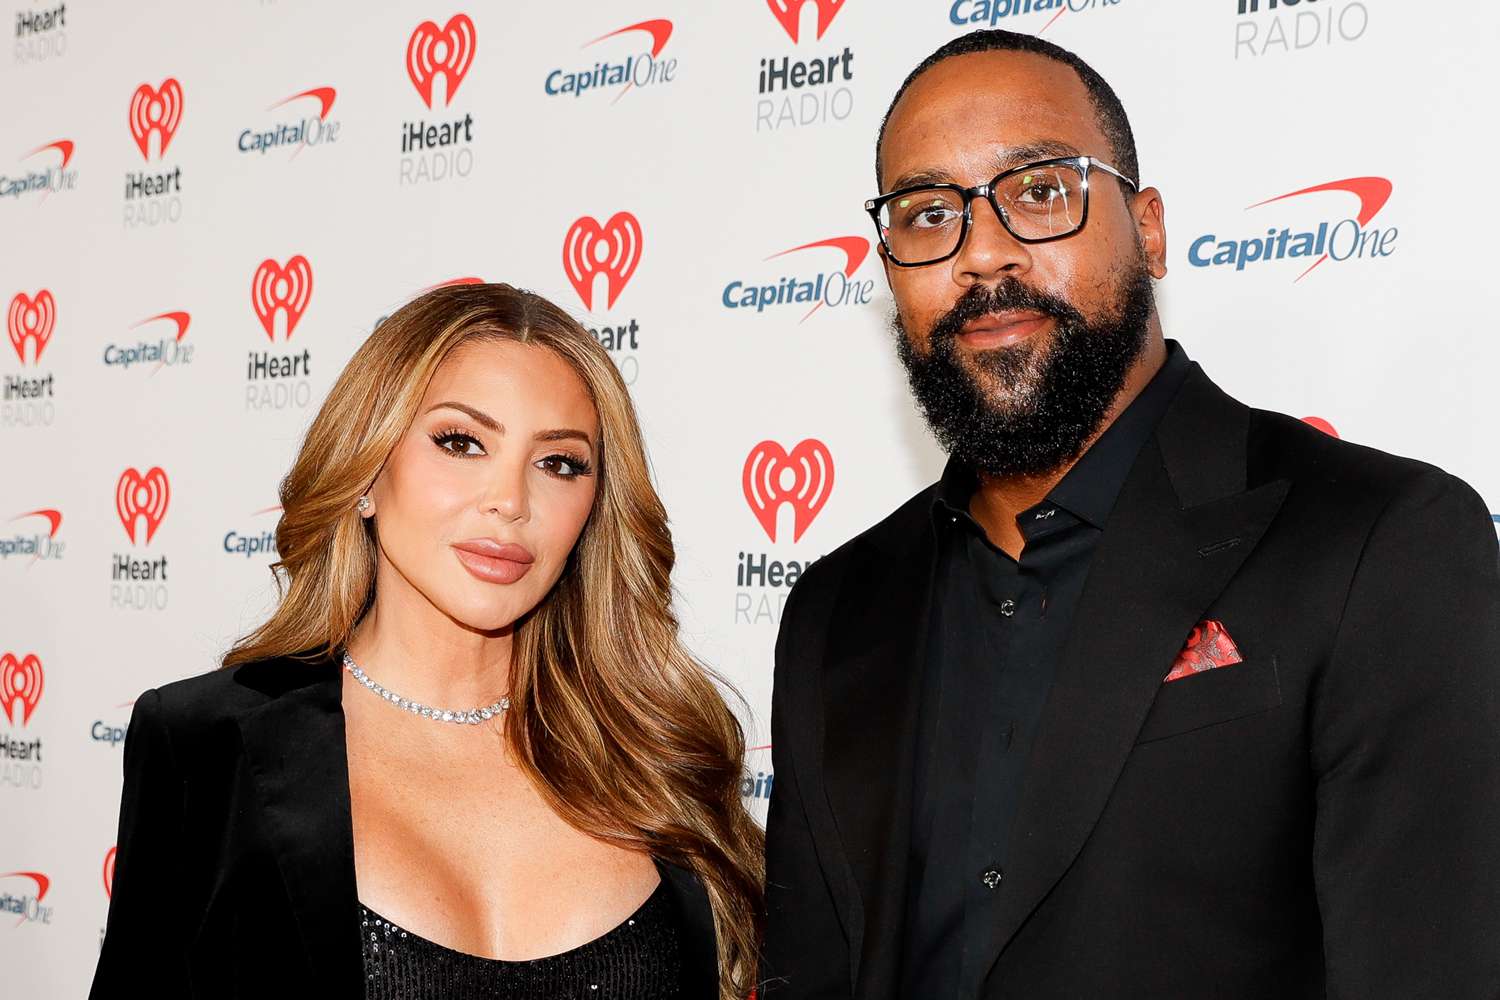 Comedian Targets Larsa Pippen And Marcus Jordan During Stand-Up Routine